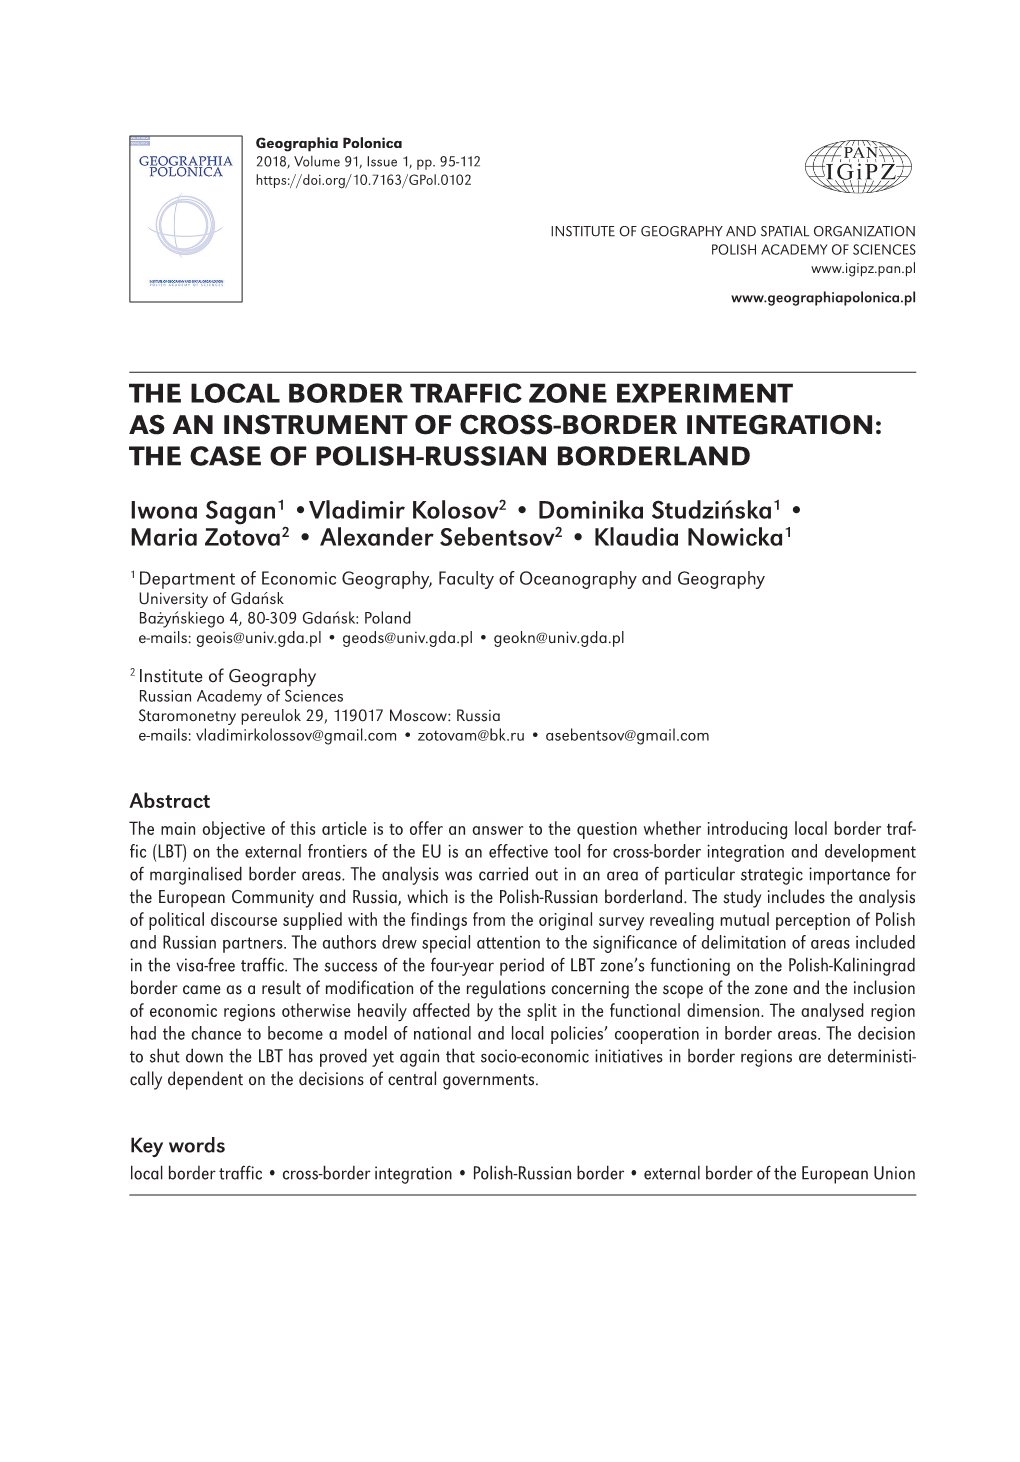 The Local Border Traffic Zone Experiment As an Instrument of Cross-Border Integration: the Case of Polish-Russian Borderland